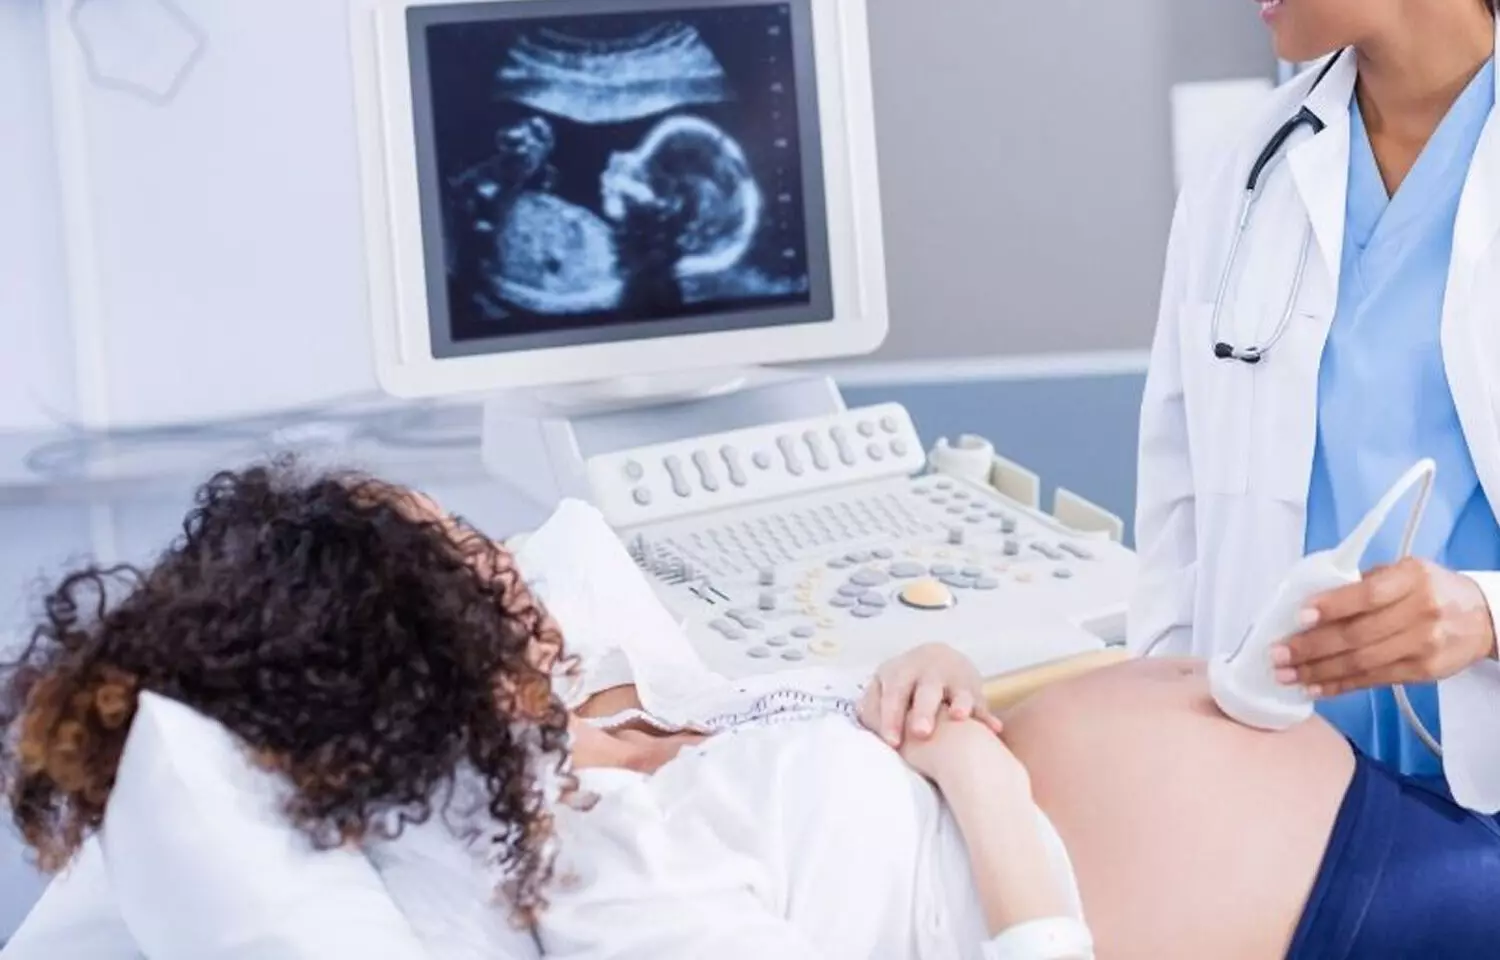 Renal artery Doppler indices may reliably predict adverse perinatal outcomes- Study